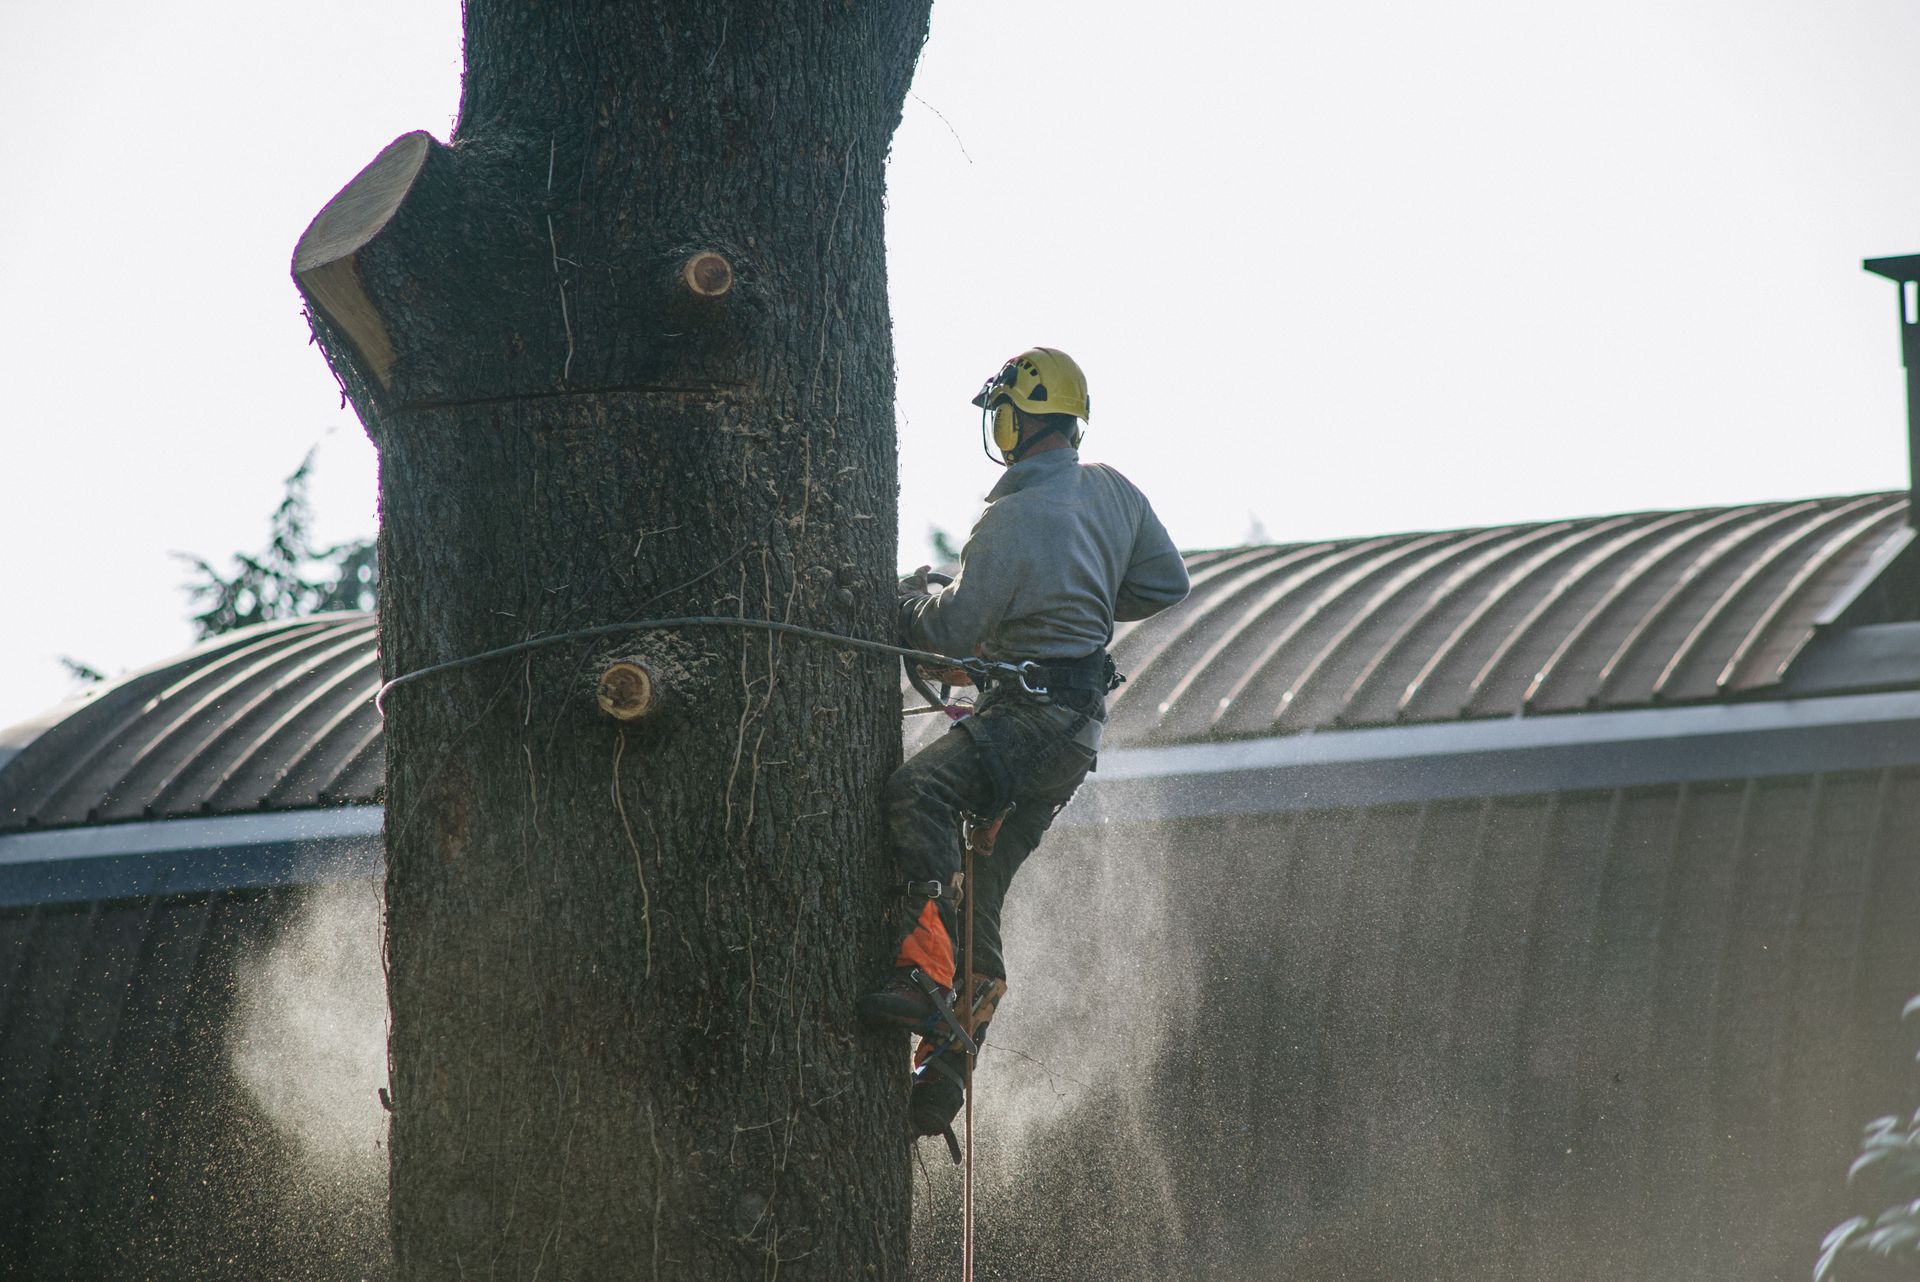 arborist cabled to large tree next to building